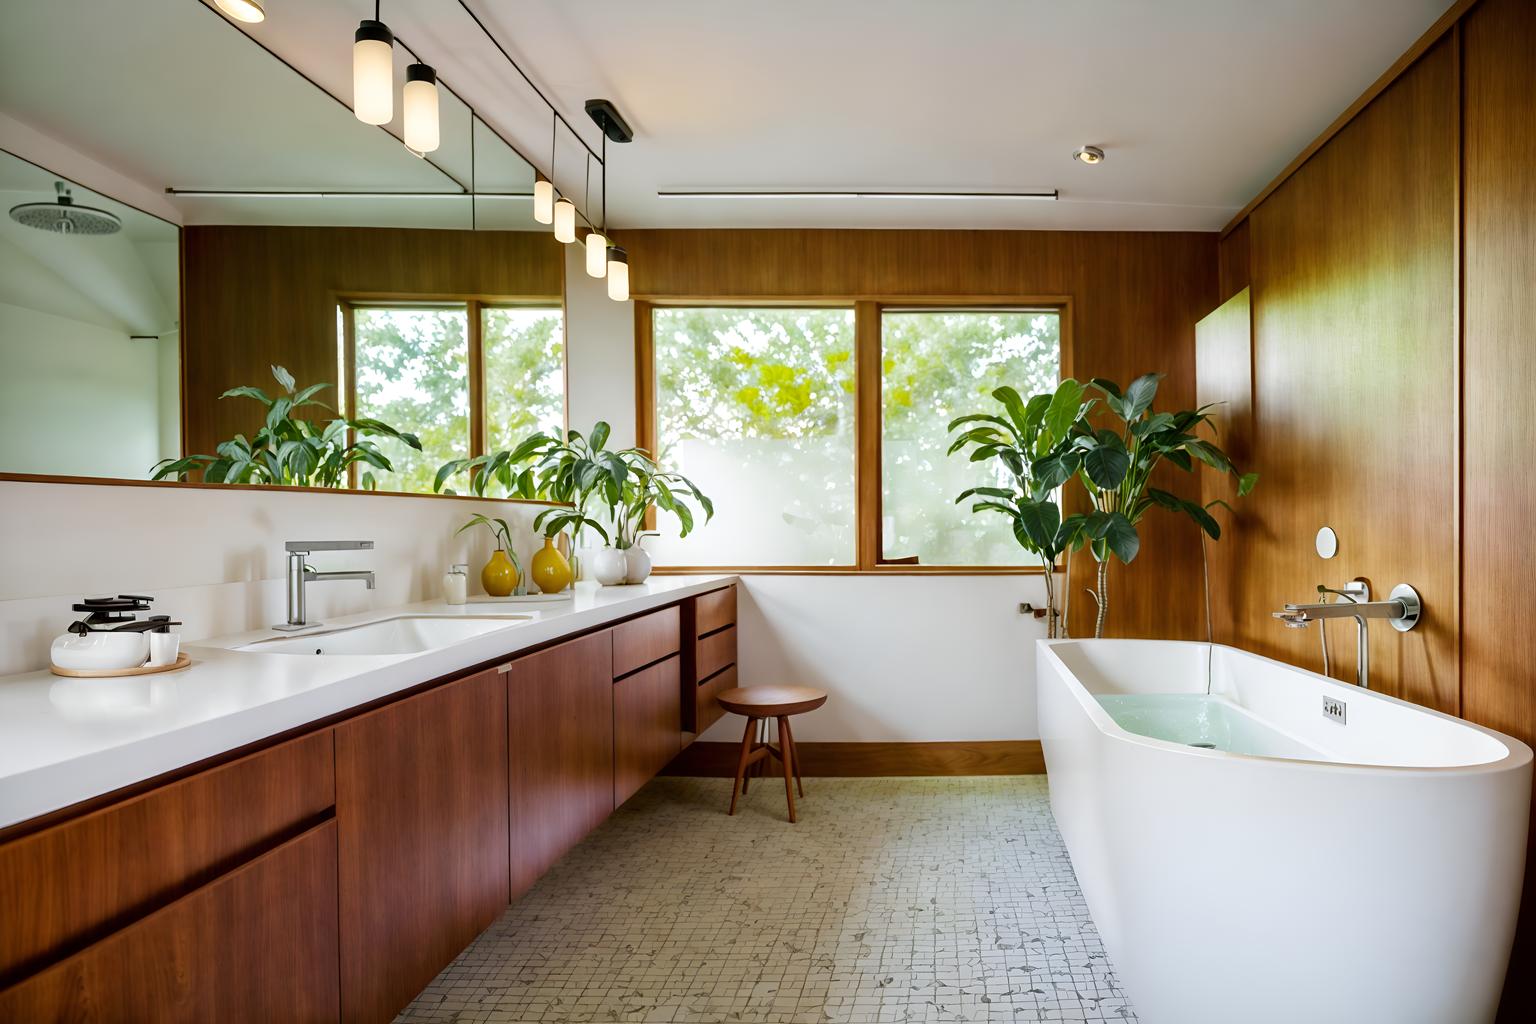 midcentury modern-style (bathroom interior) with plant and bathroom sink with faucet and bath towel and bathtub and bath rail and mirror and shower and toilet seat. . with function over form and clean lines and wood pendant light mid century modern chandelier and graphic shapes and muted tones and minimalist and integrating indoor and outdoor motifs and natural and manmade materials. . cinematic photo, highly detailed, cinematic lighting, ultra-detailed, ultrarealistic, photorealism, 8k. midcentury modern interior design style. masterpiece, cinematic light, ultrarealistic+, photorealistic+, 8k, raw photo, realistic, sharp focus on eyes, (symmetrical eyes), (intact eyes), hyperrealistic, highest quality, best quality, , highly detailed, masterpiece, best quality, extremely detailed 8k wallpaper, masterpiece, best quality, ultra-detailed, best shadow, detailed background, detailed face, detailed eyes, high contrast, best illumination, detailed face, dulux, caustic, dynamic angle, detailed glow. dramatic lighting. highly detailed, insanely detailed hair, symmetrical, intricate details, professionally retouched, 8k high definition. strong bokeh. award winning photo.